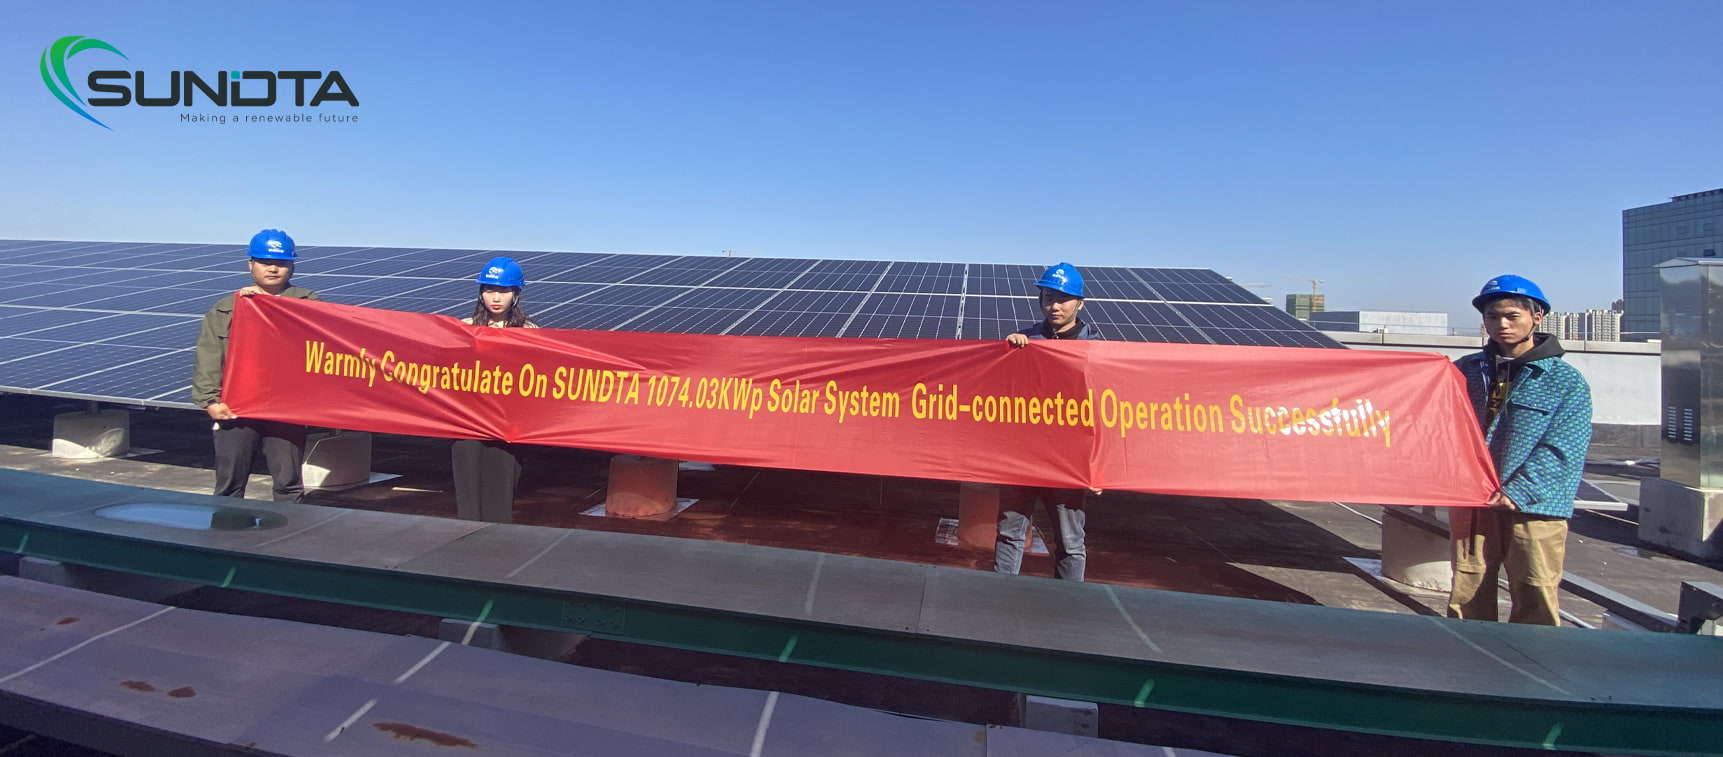 SUNDTA 1074.03KW rooftop distributed photovoltaic project has been connected to the grid and completed